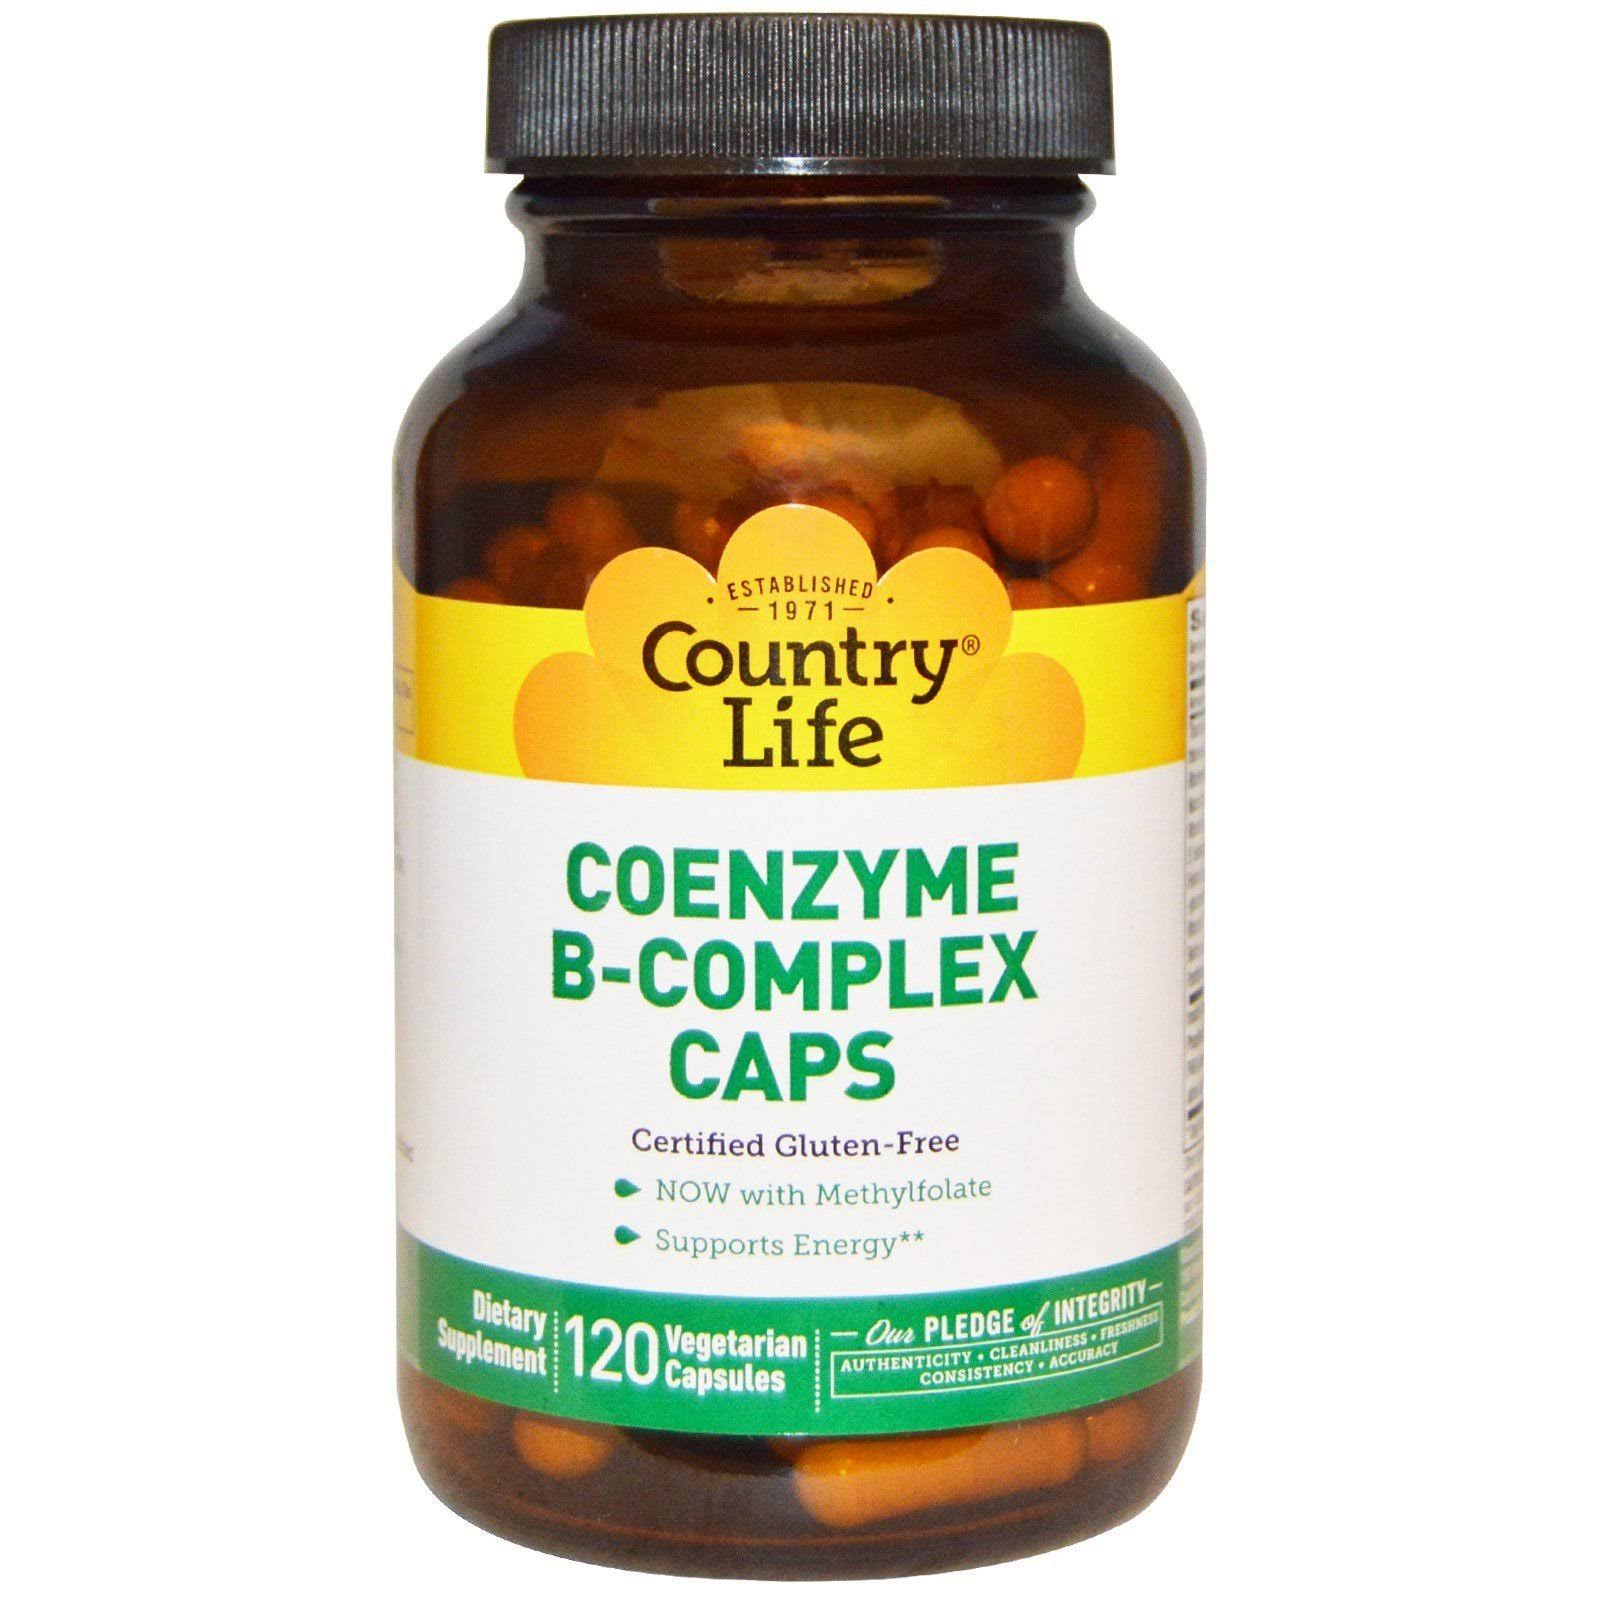 Country Life CoEnzyme B-Complex Caps - 120 Vegetarian Capsules